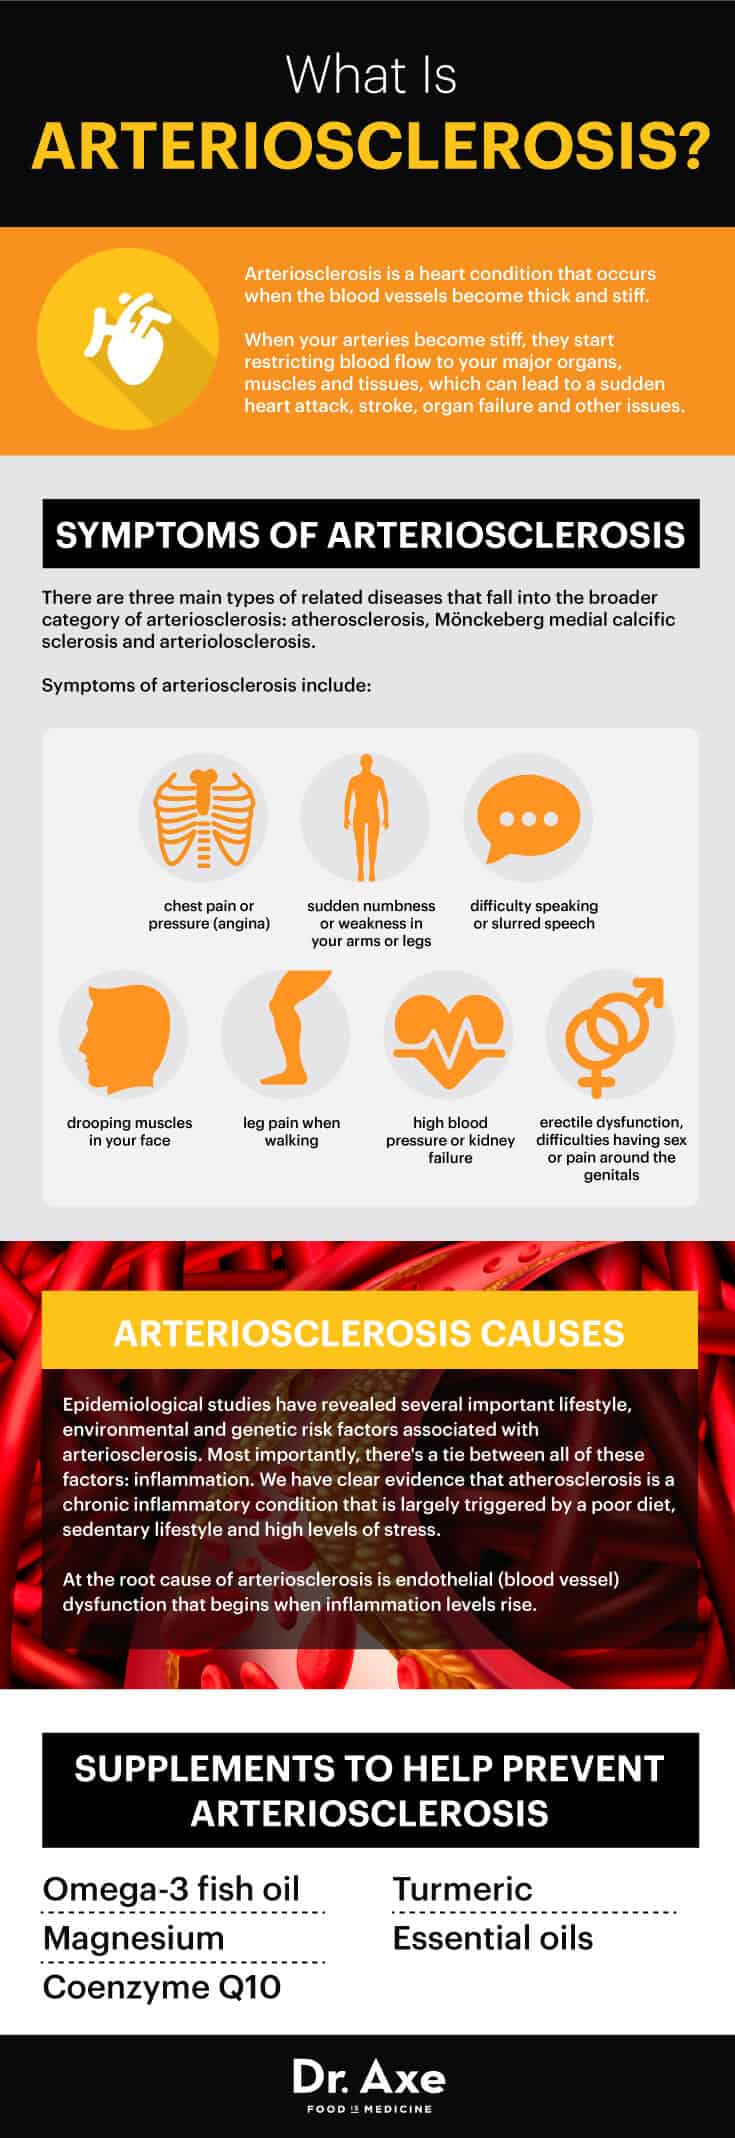 What is arteriosclerosis? - Dr. Axe